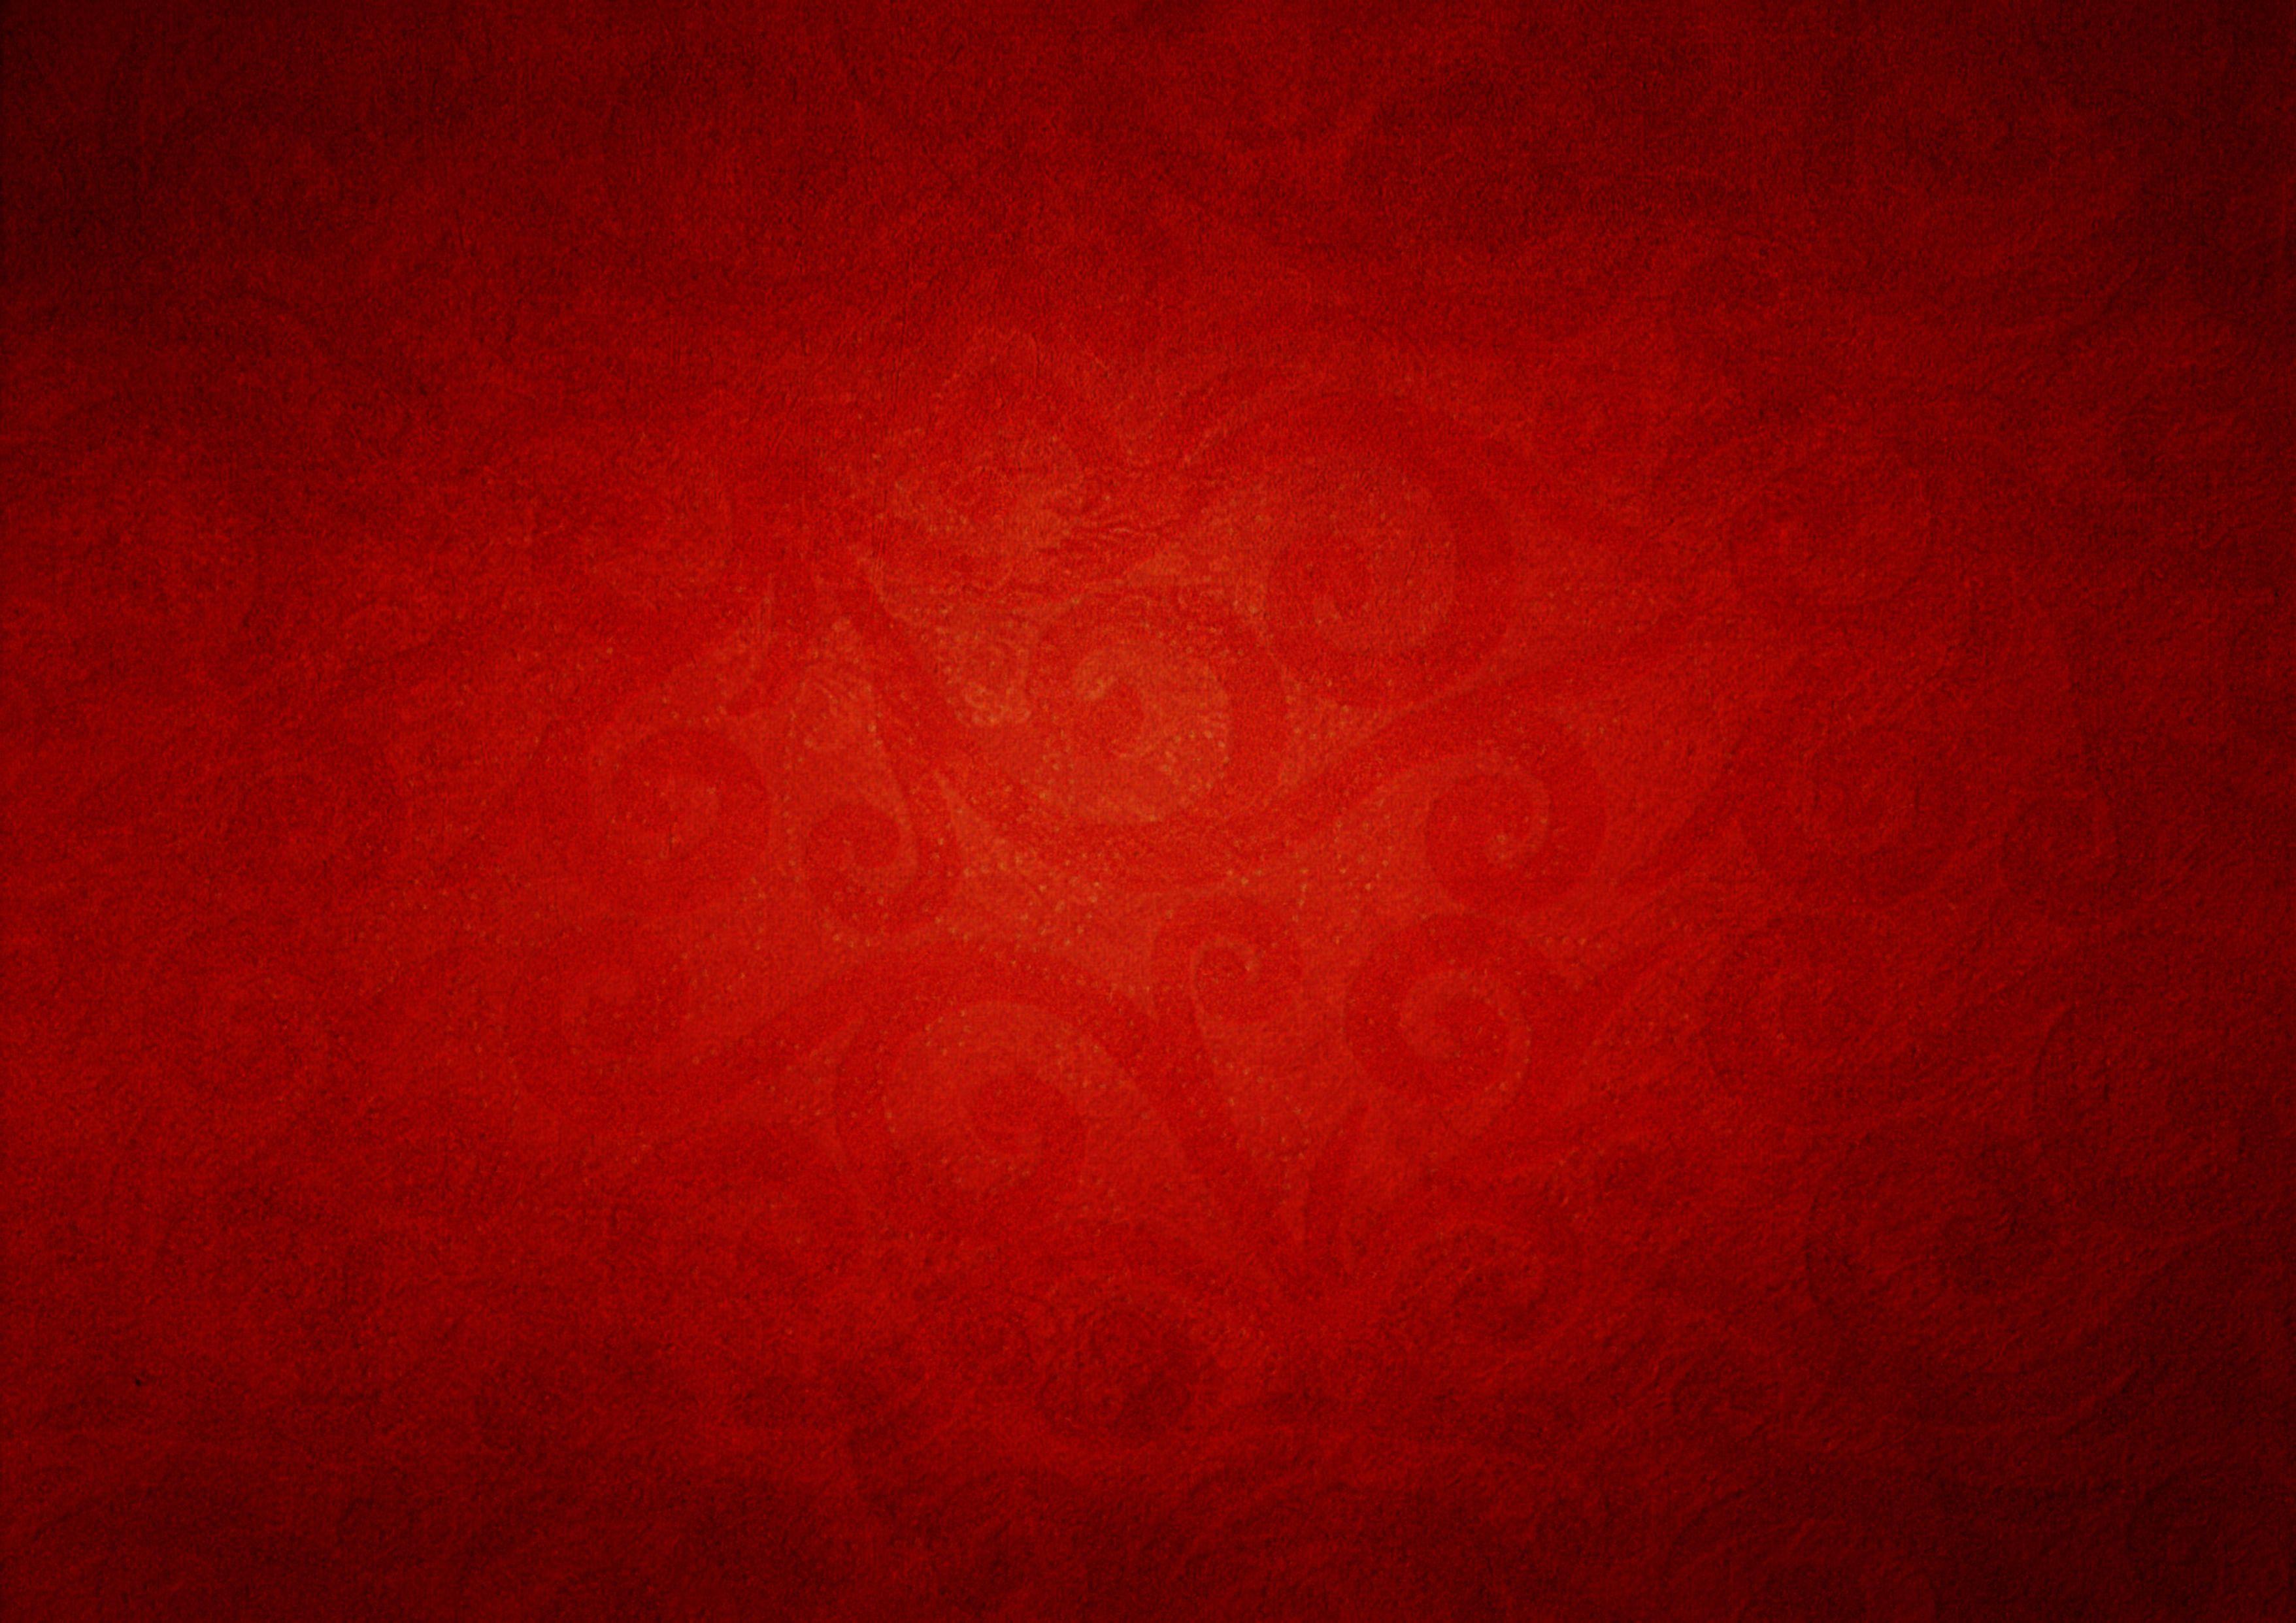 red paint, texture paints, background, download photo, red color.